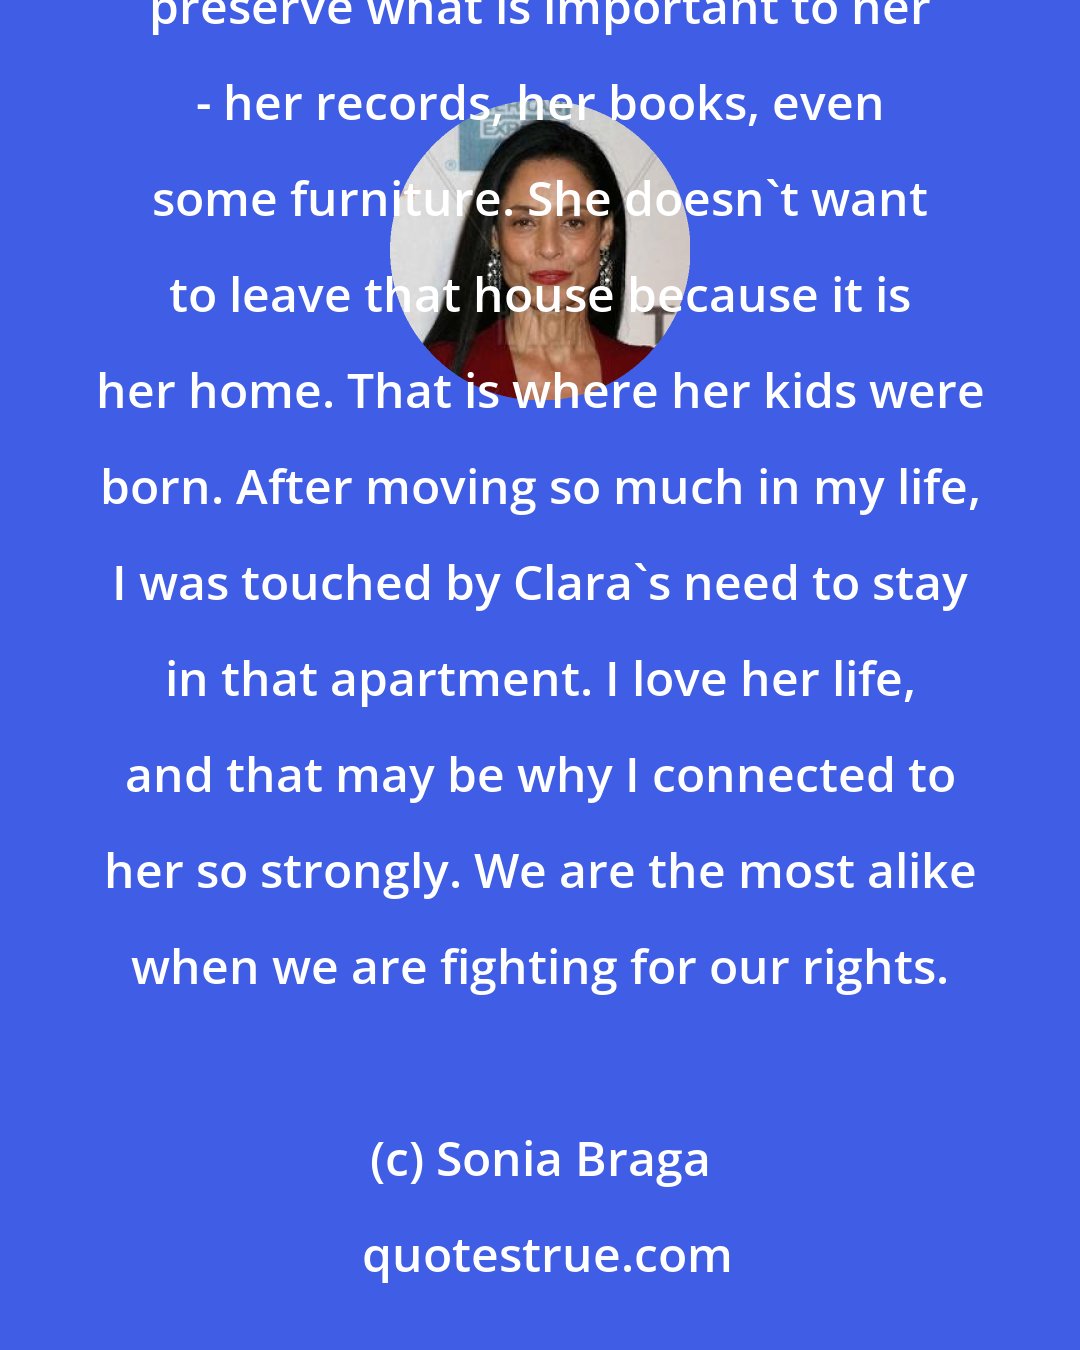 Sonia Braga: I think the relationship [in Aquarius] with her nephew shows that she's not nostalgic. She just wants to preserve what is important to her - her records, her books, even some furniture. She doesn't want to leave that house because it is her home. That is where her kids were born. After moving so much in my life, I was touched by Clara's need to stay in that apartment. I love her life, and that may be why I connected to her so strongly. We are the most alike when we are fighting for our rights.